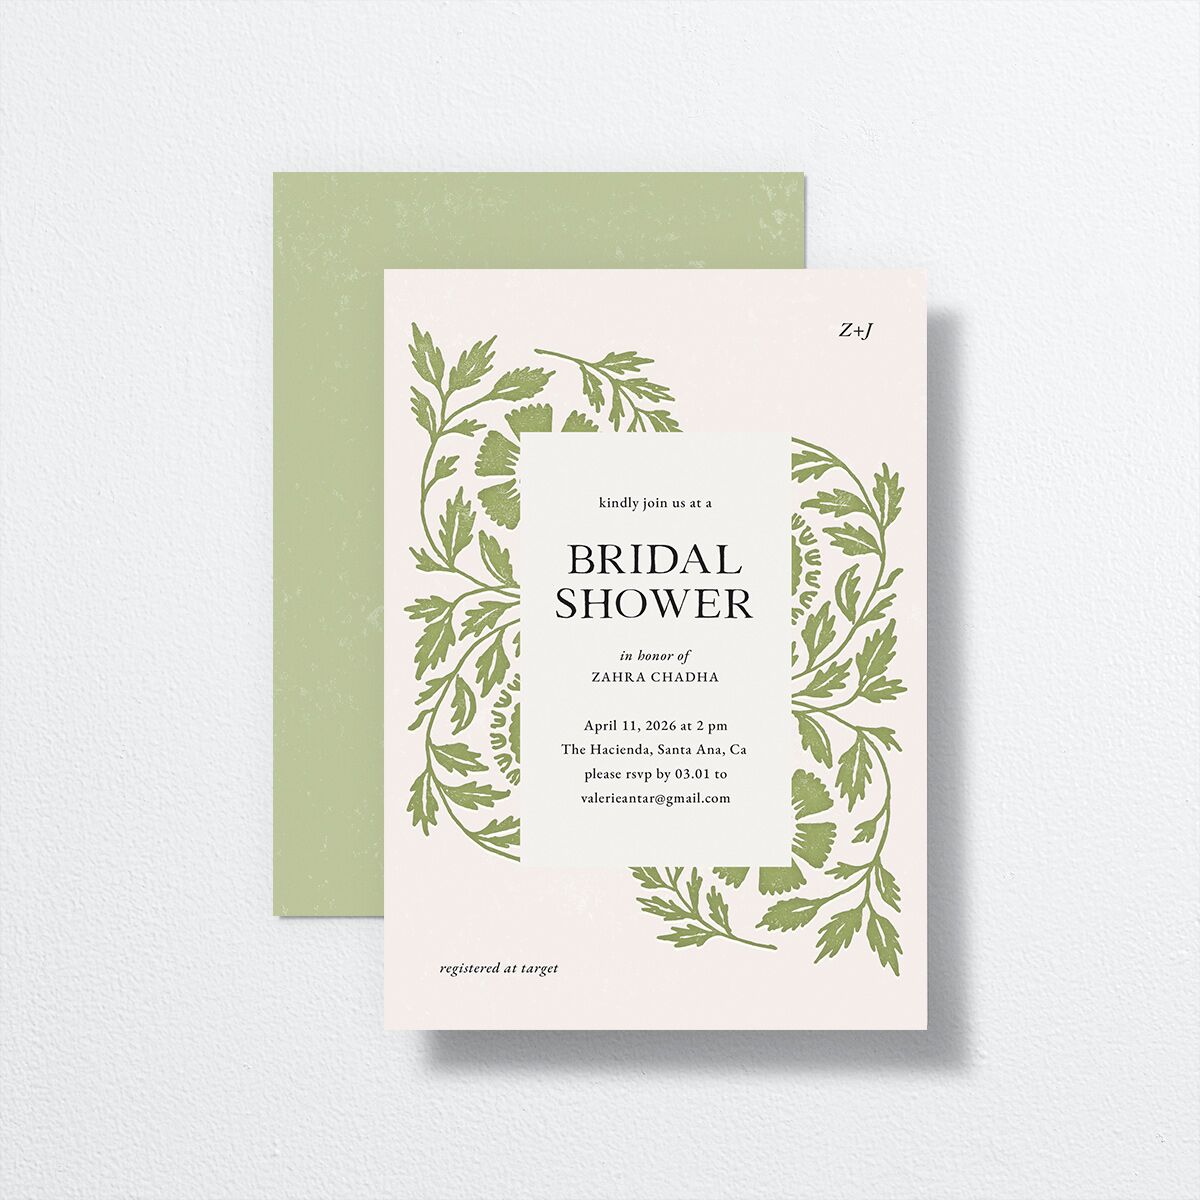 Block Print Bridal Shower Invitations front-and-back in green